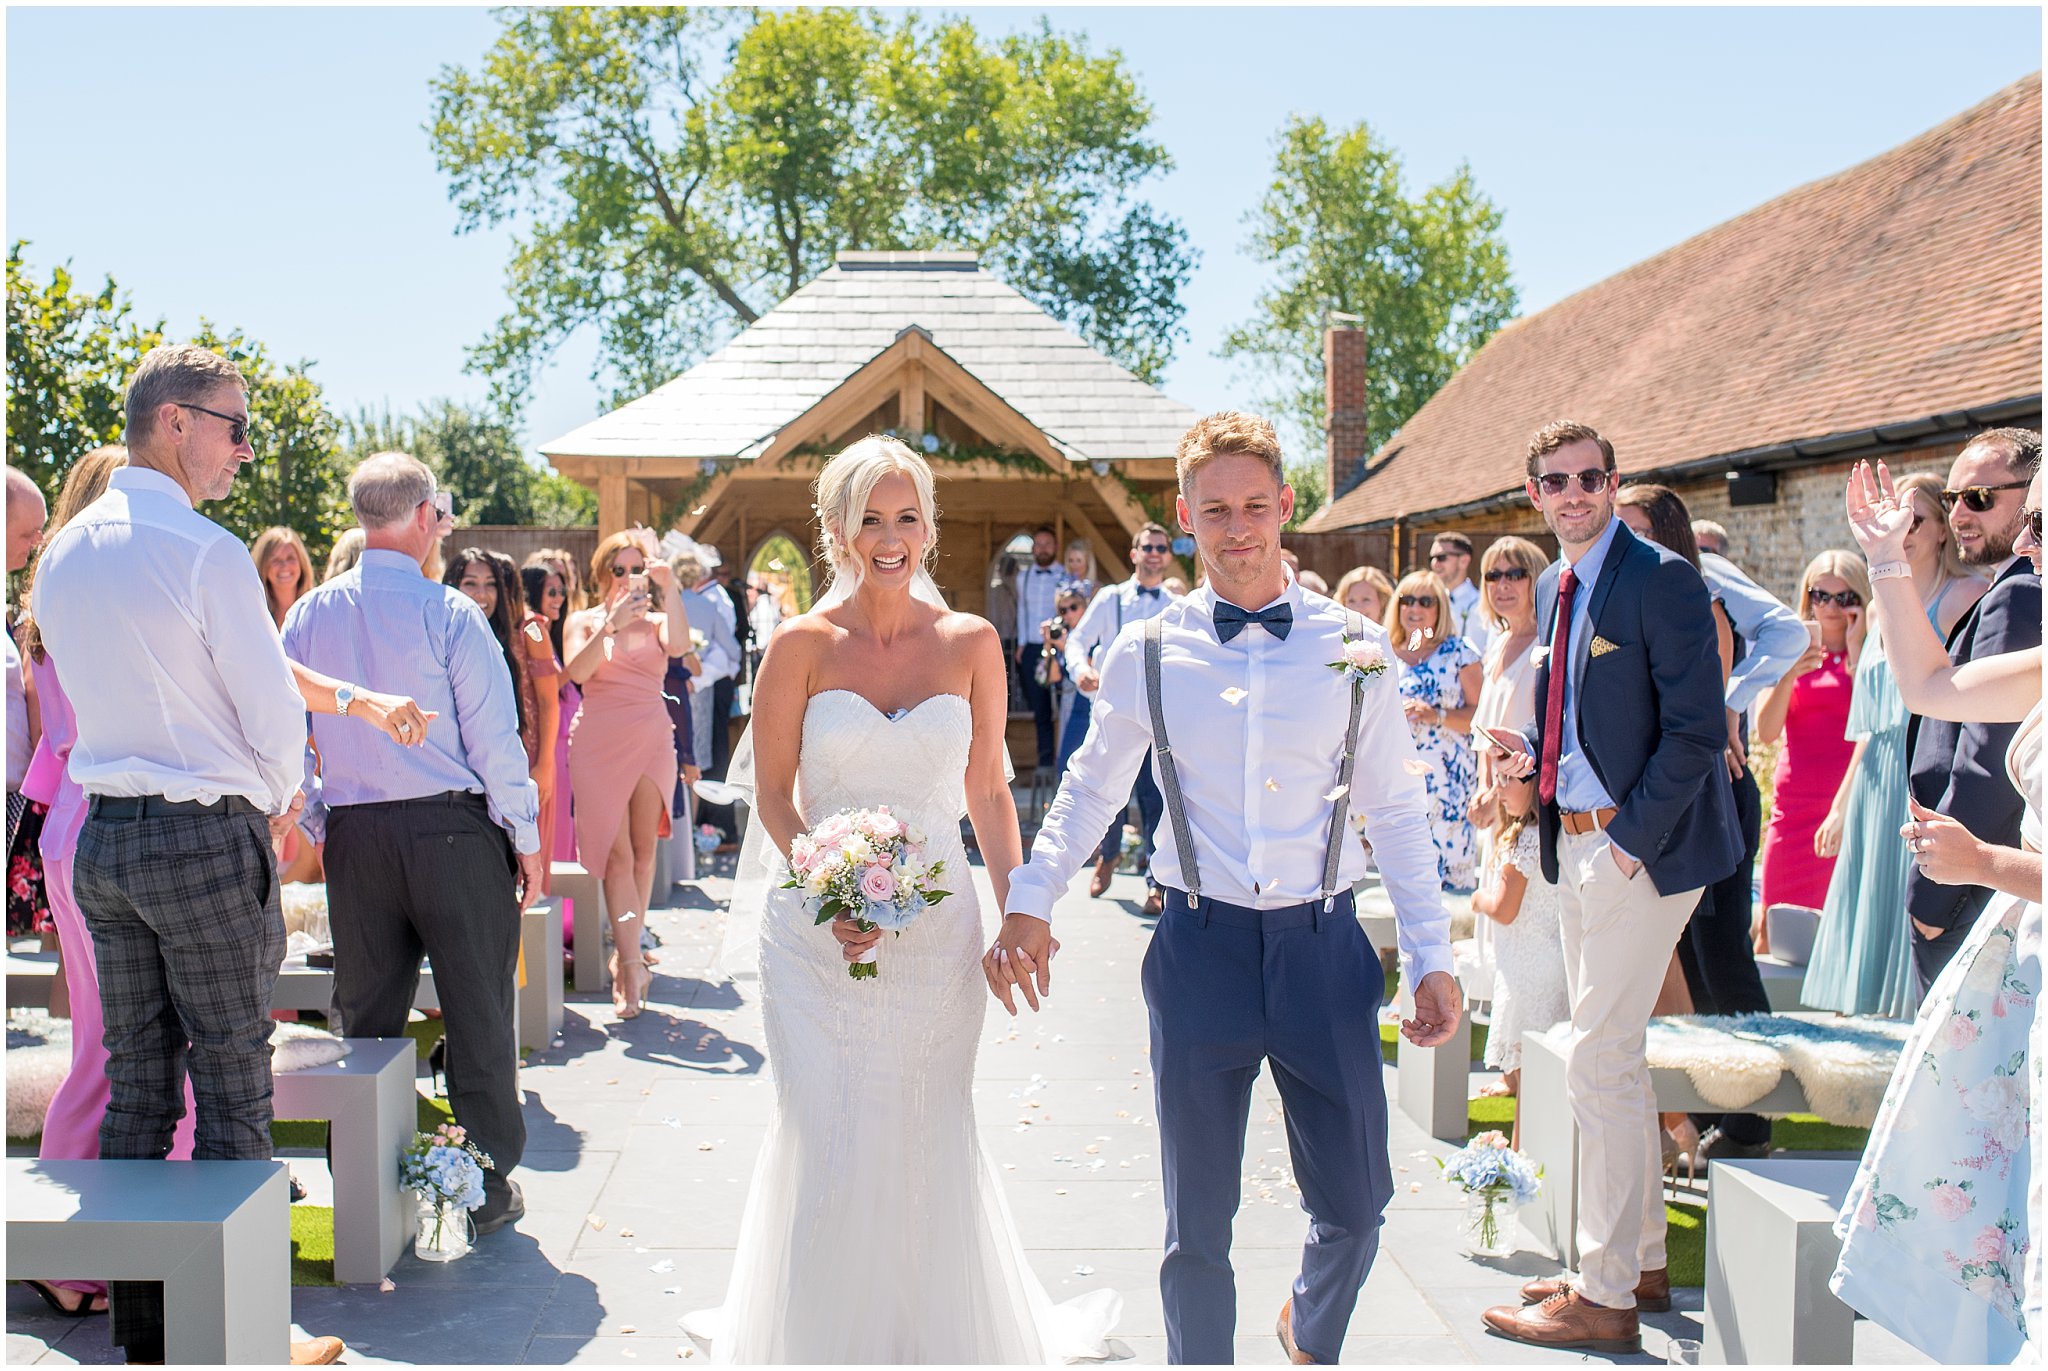 Southend Barns Outdoor Wedding | Sophie & James | Chichester Wedding Photographer